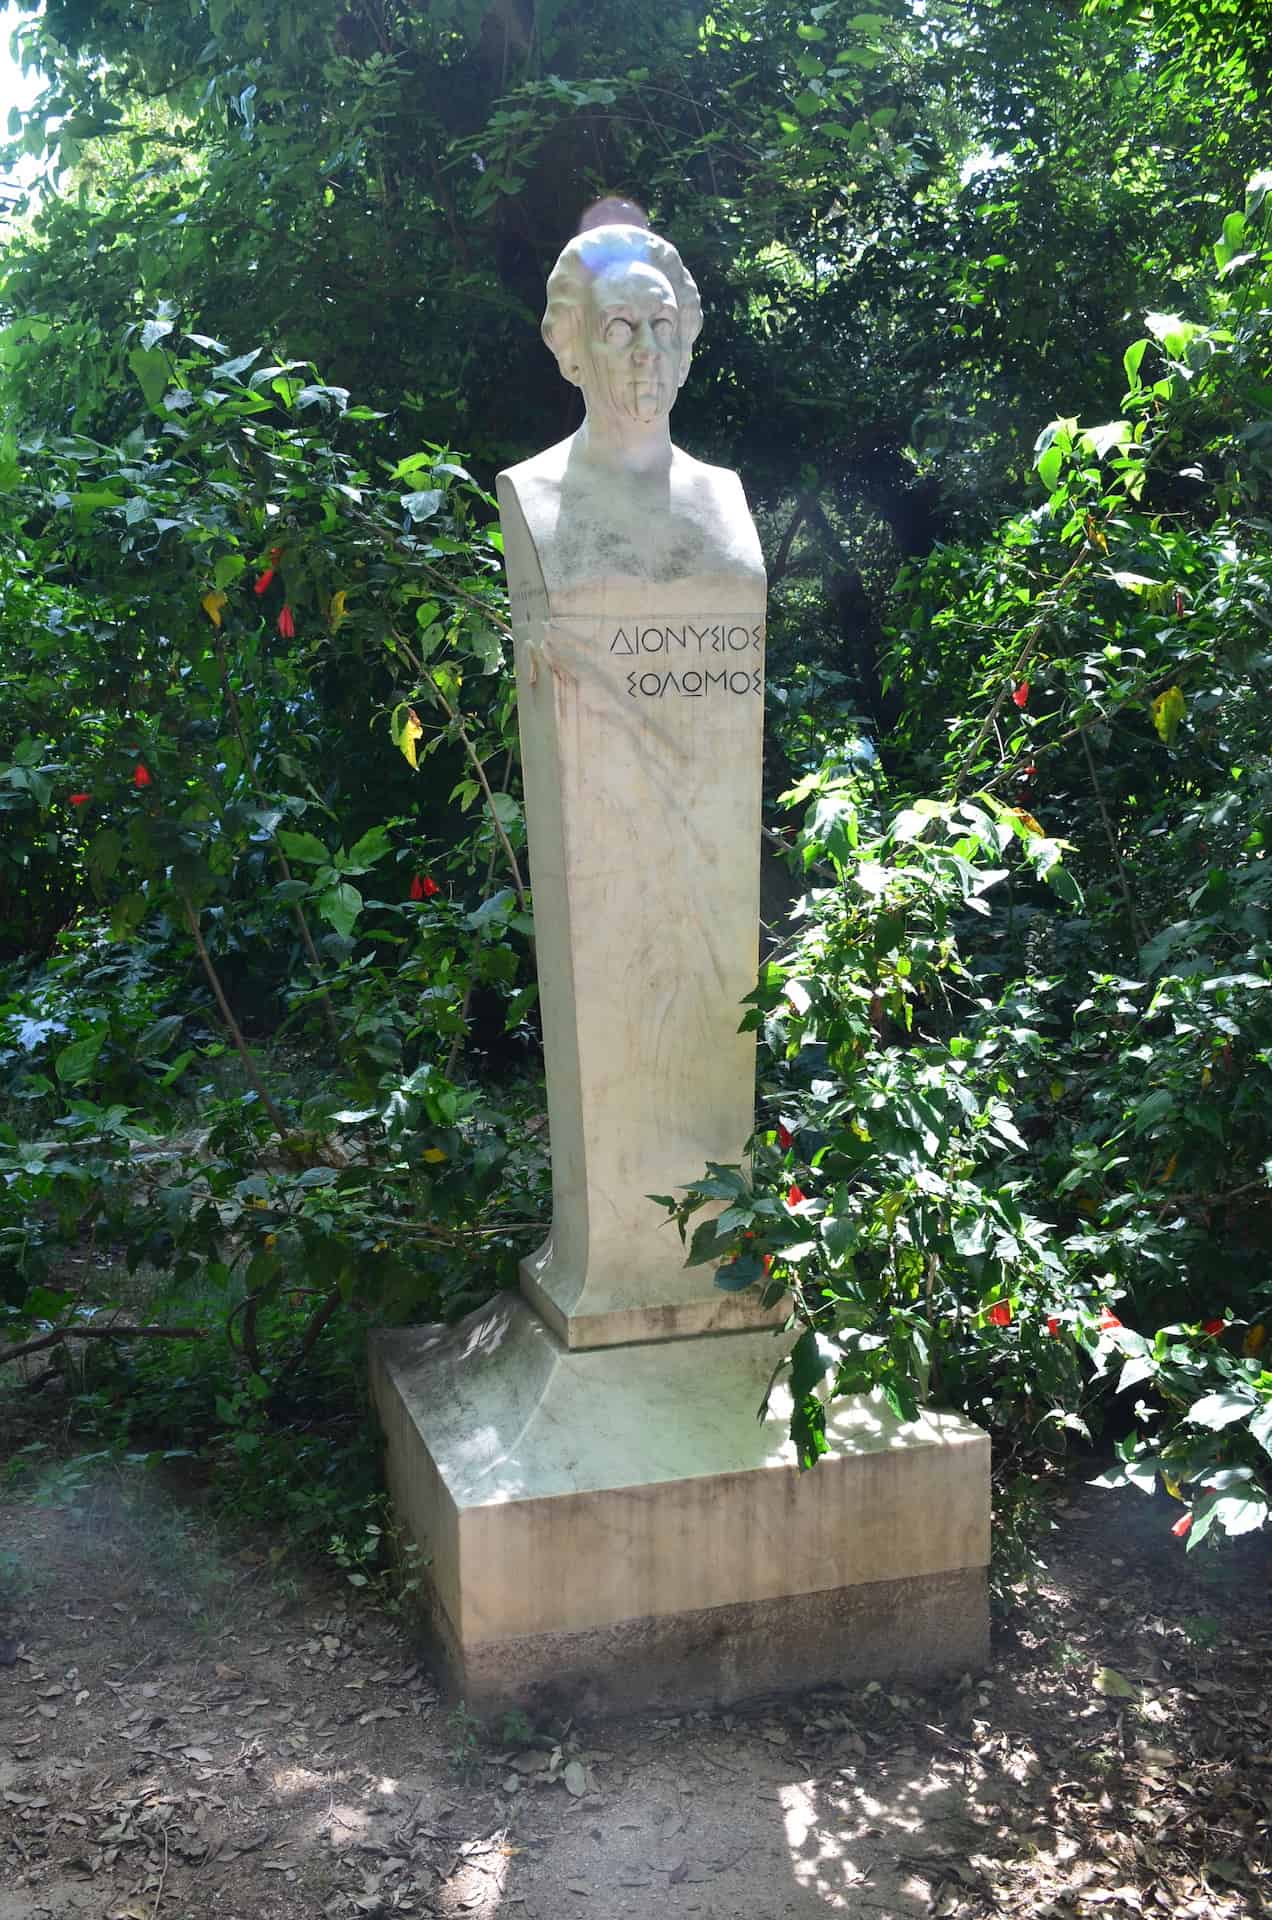 Bust of Dionysios Solomos at the National Garden in Athens Greece